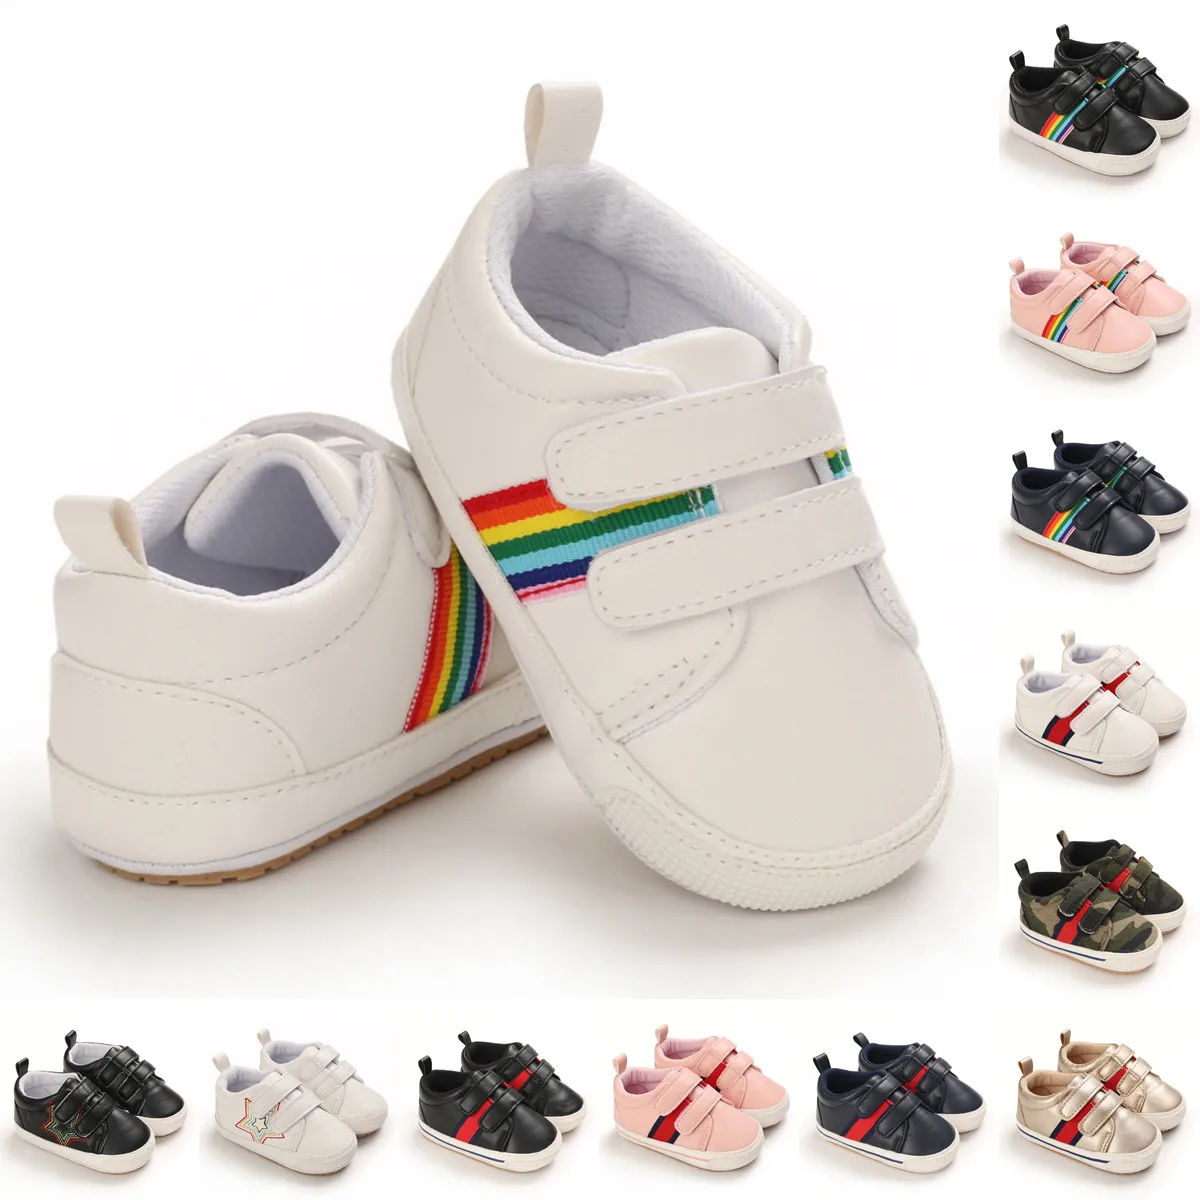 Newborn Toddler Shoes Male Baby Step Front Shoes PU female baby casual moccasin shoes non-slip classic baby shoes